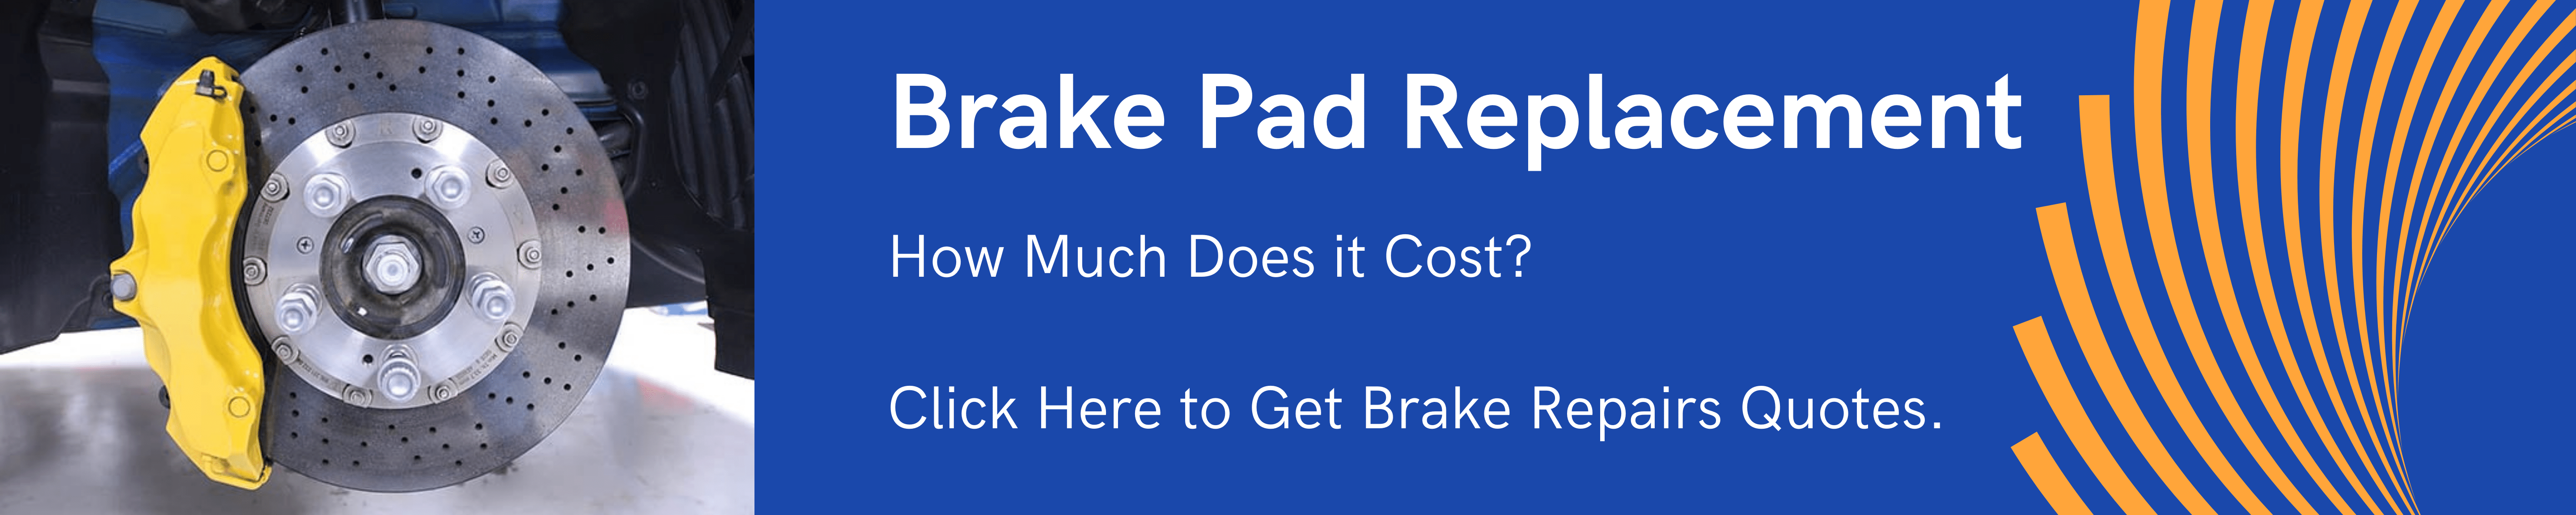 Brake Pad Replacement - How Much Does It Cost?